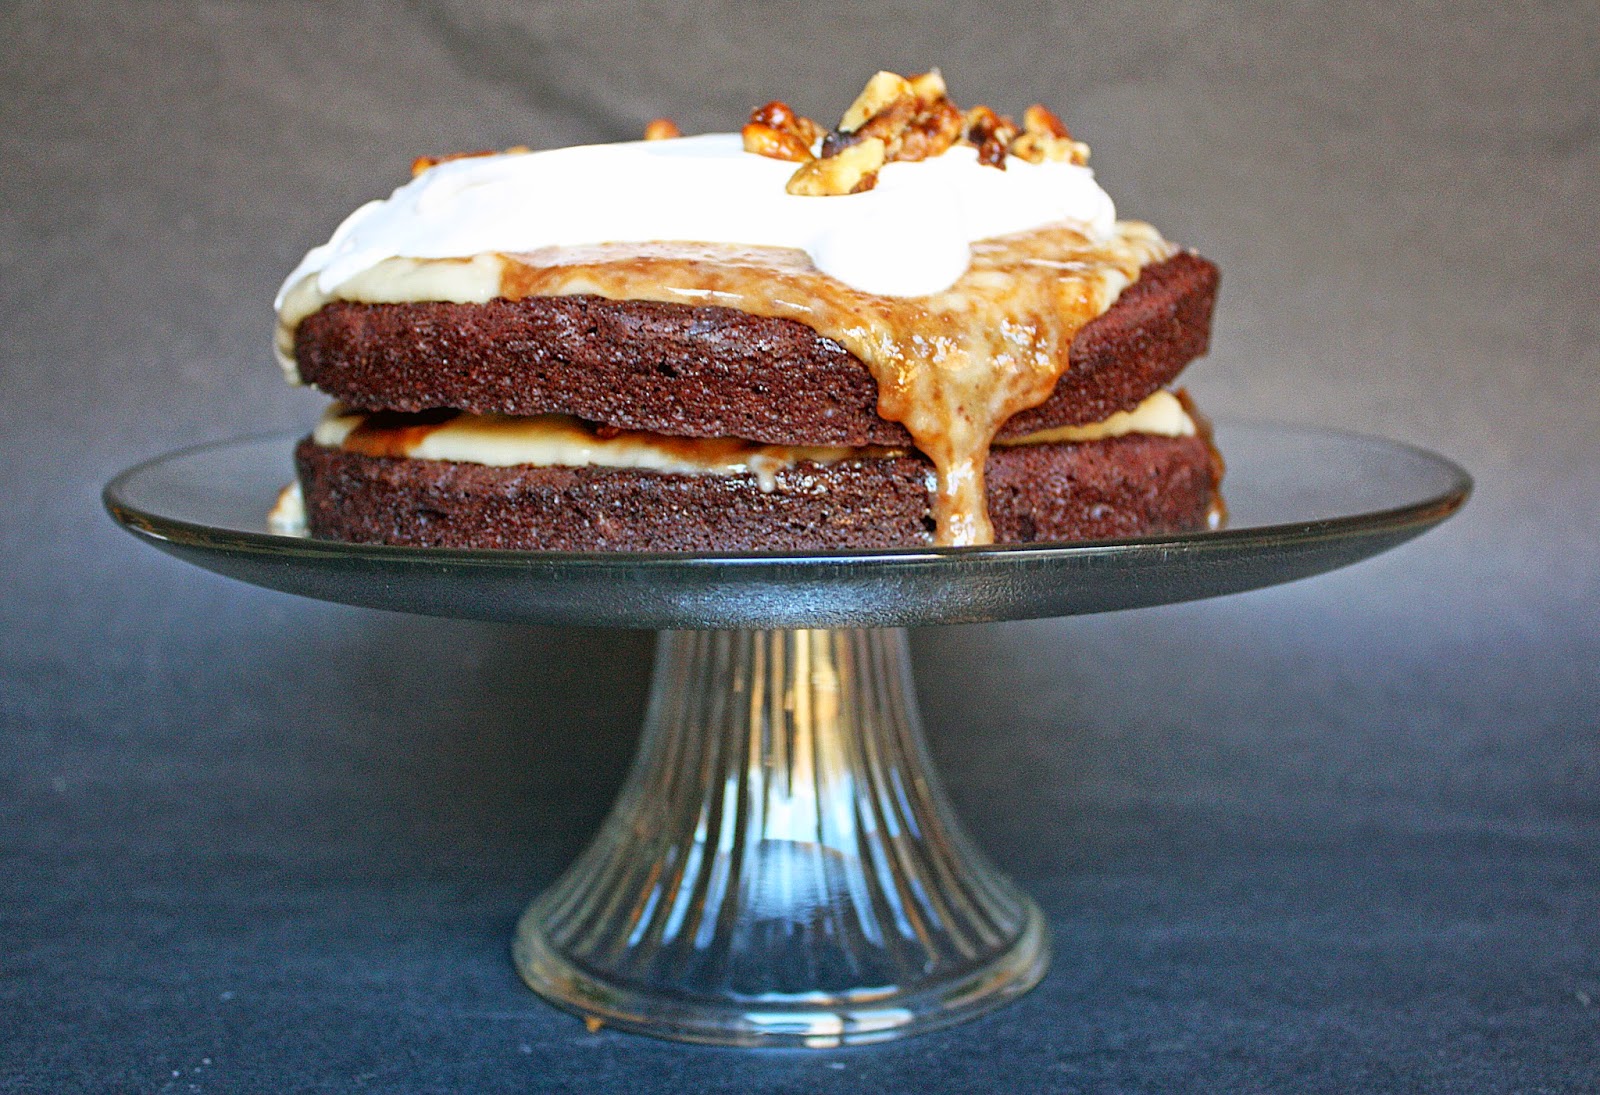 Vegan “better than sex” cake (rich chocolate cake with vanilla pudding, caramel, and whipped cream)